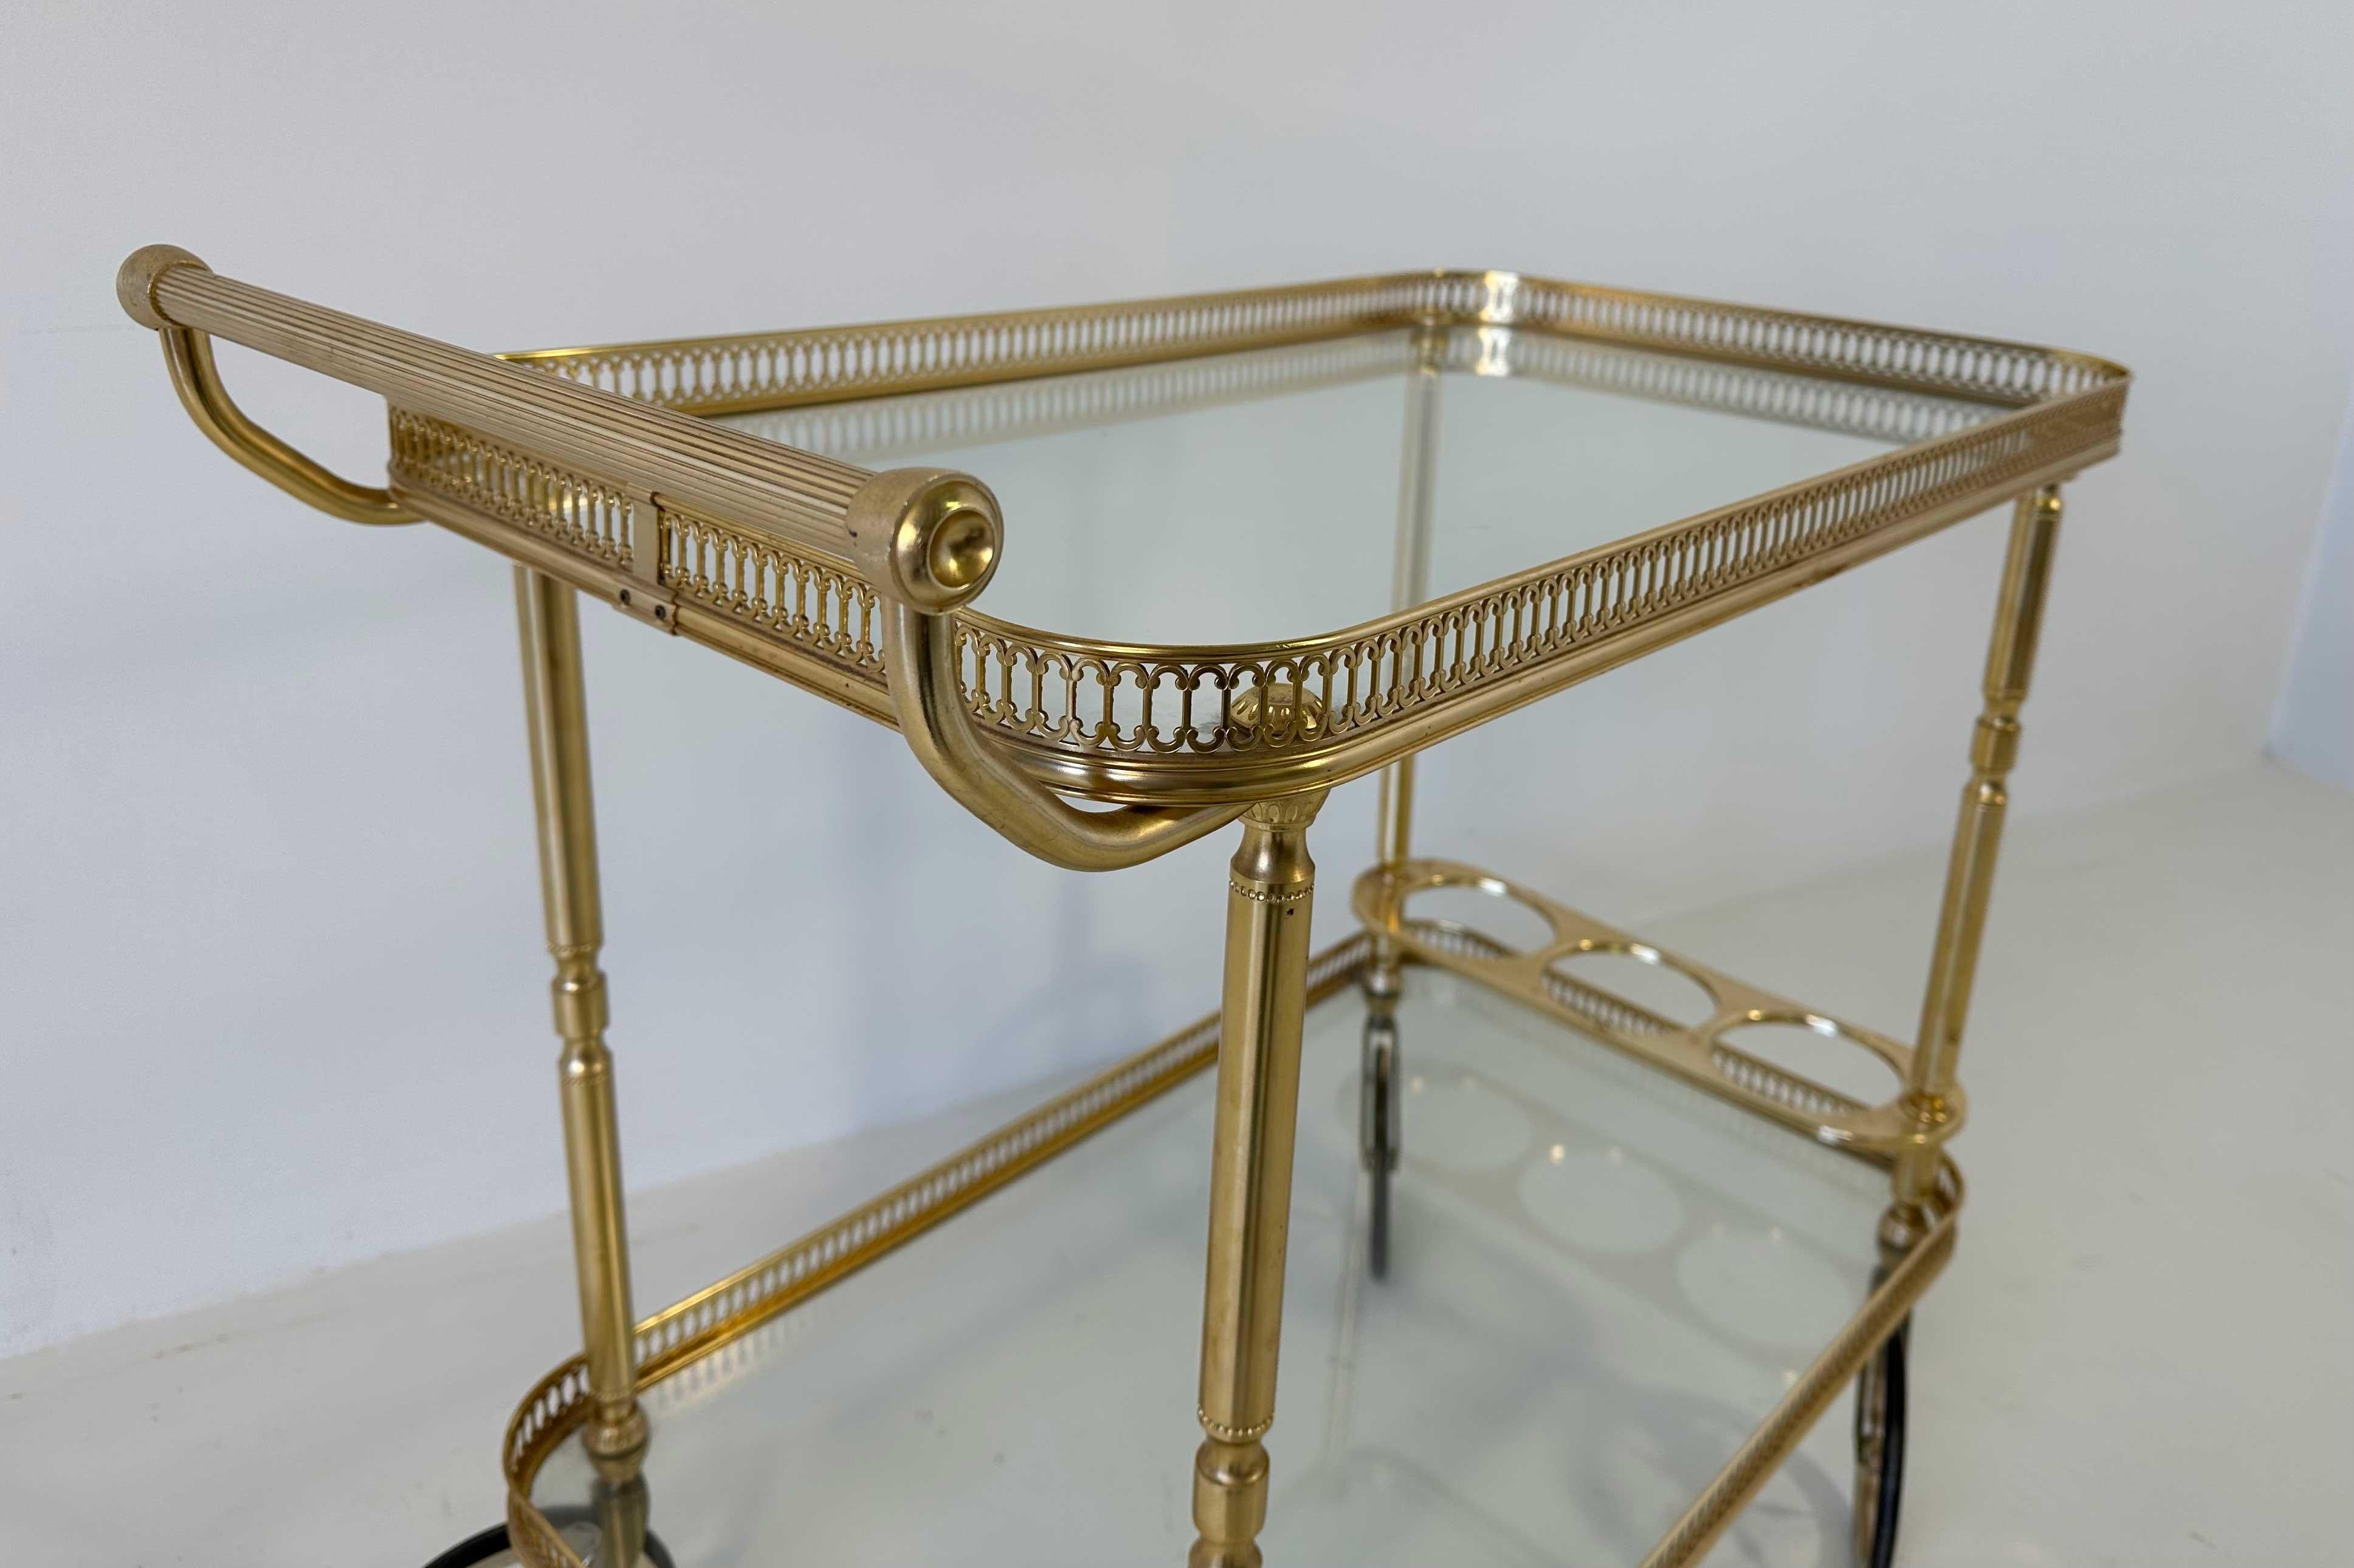 Late 20th Century Italian Mid Century Modern Brass and Glass Tray Bart Cart Table by MB, 1970s For Sale